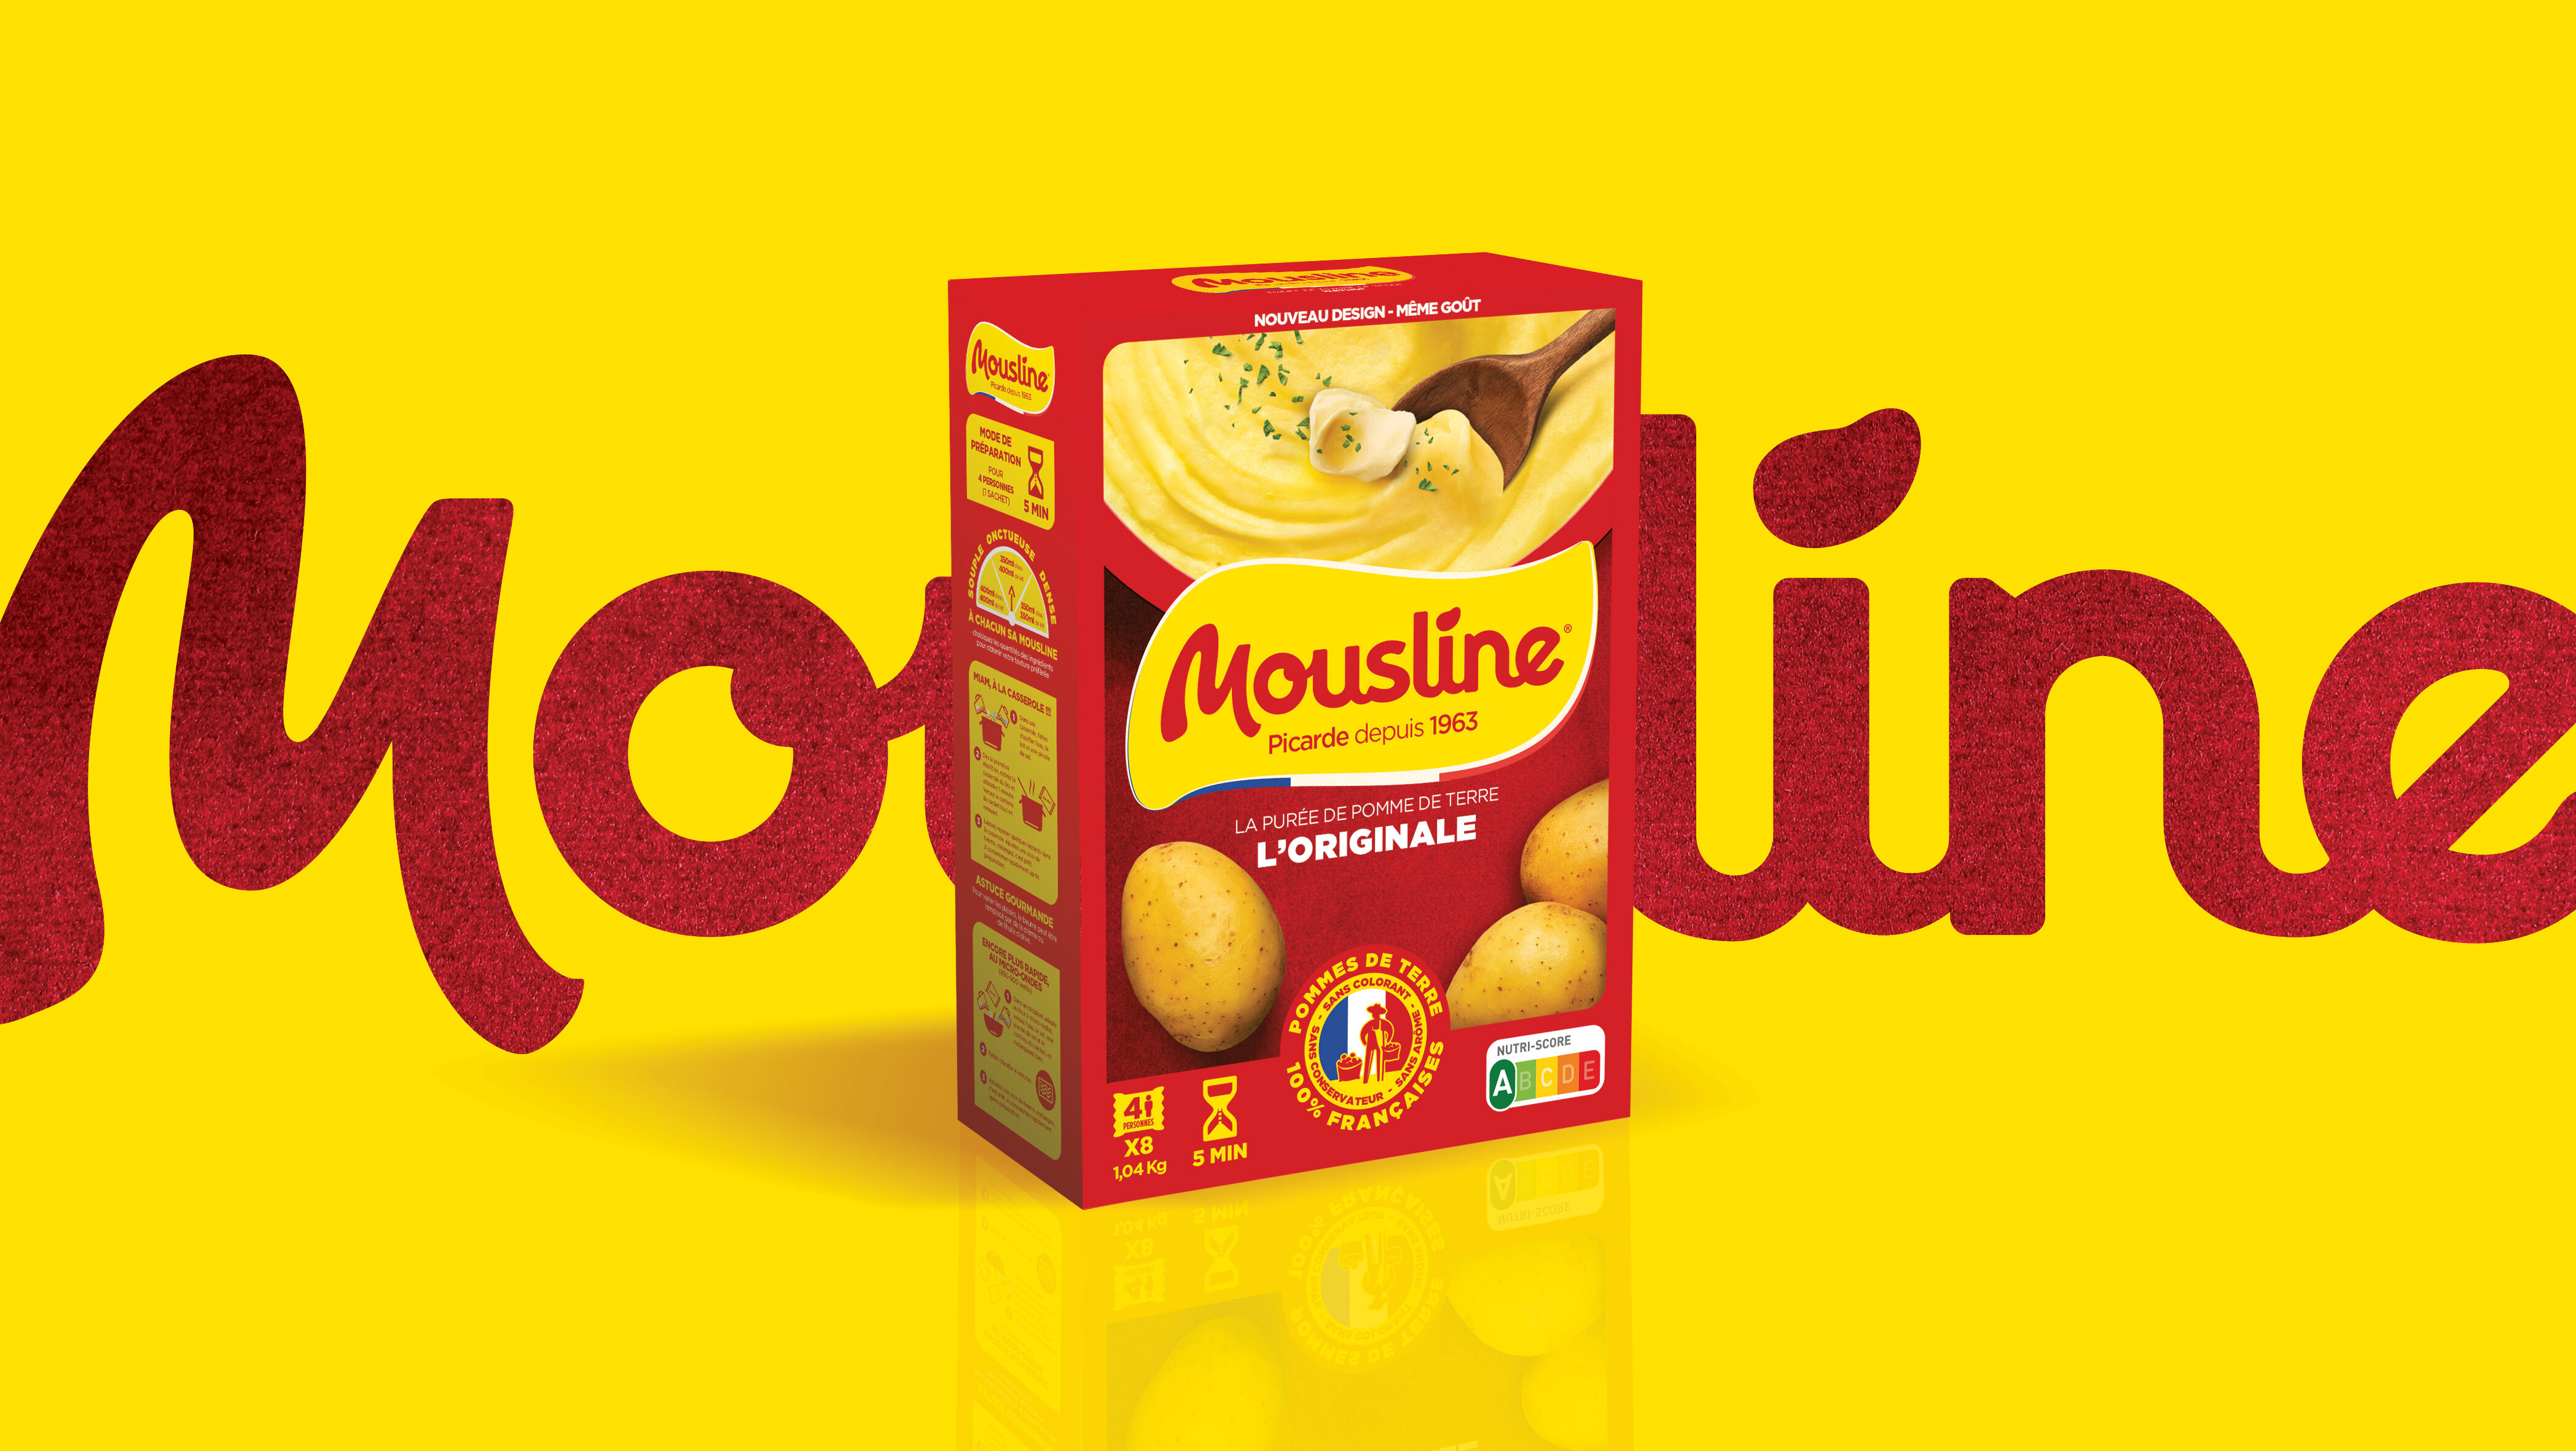 Iconic Culinary Brand Mousline is Revived for a New Generation by Marks